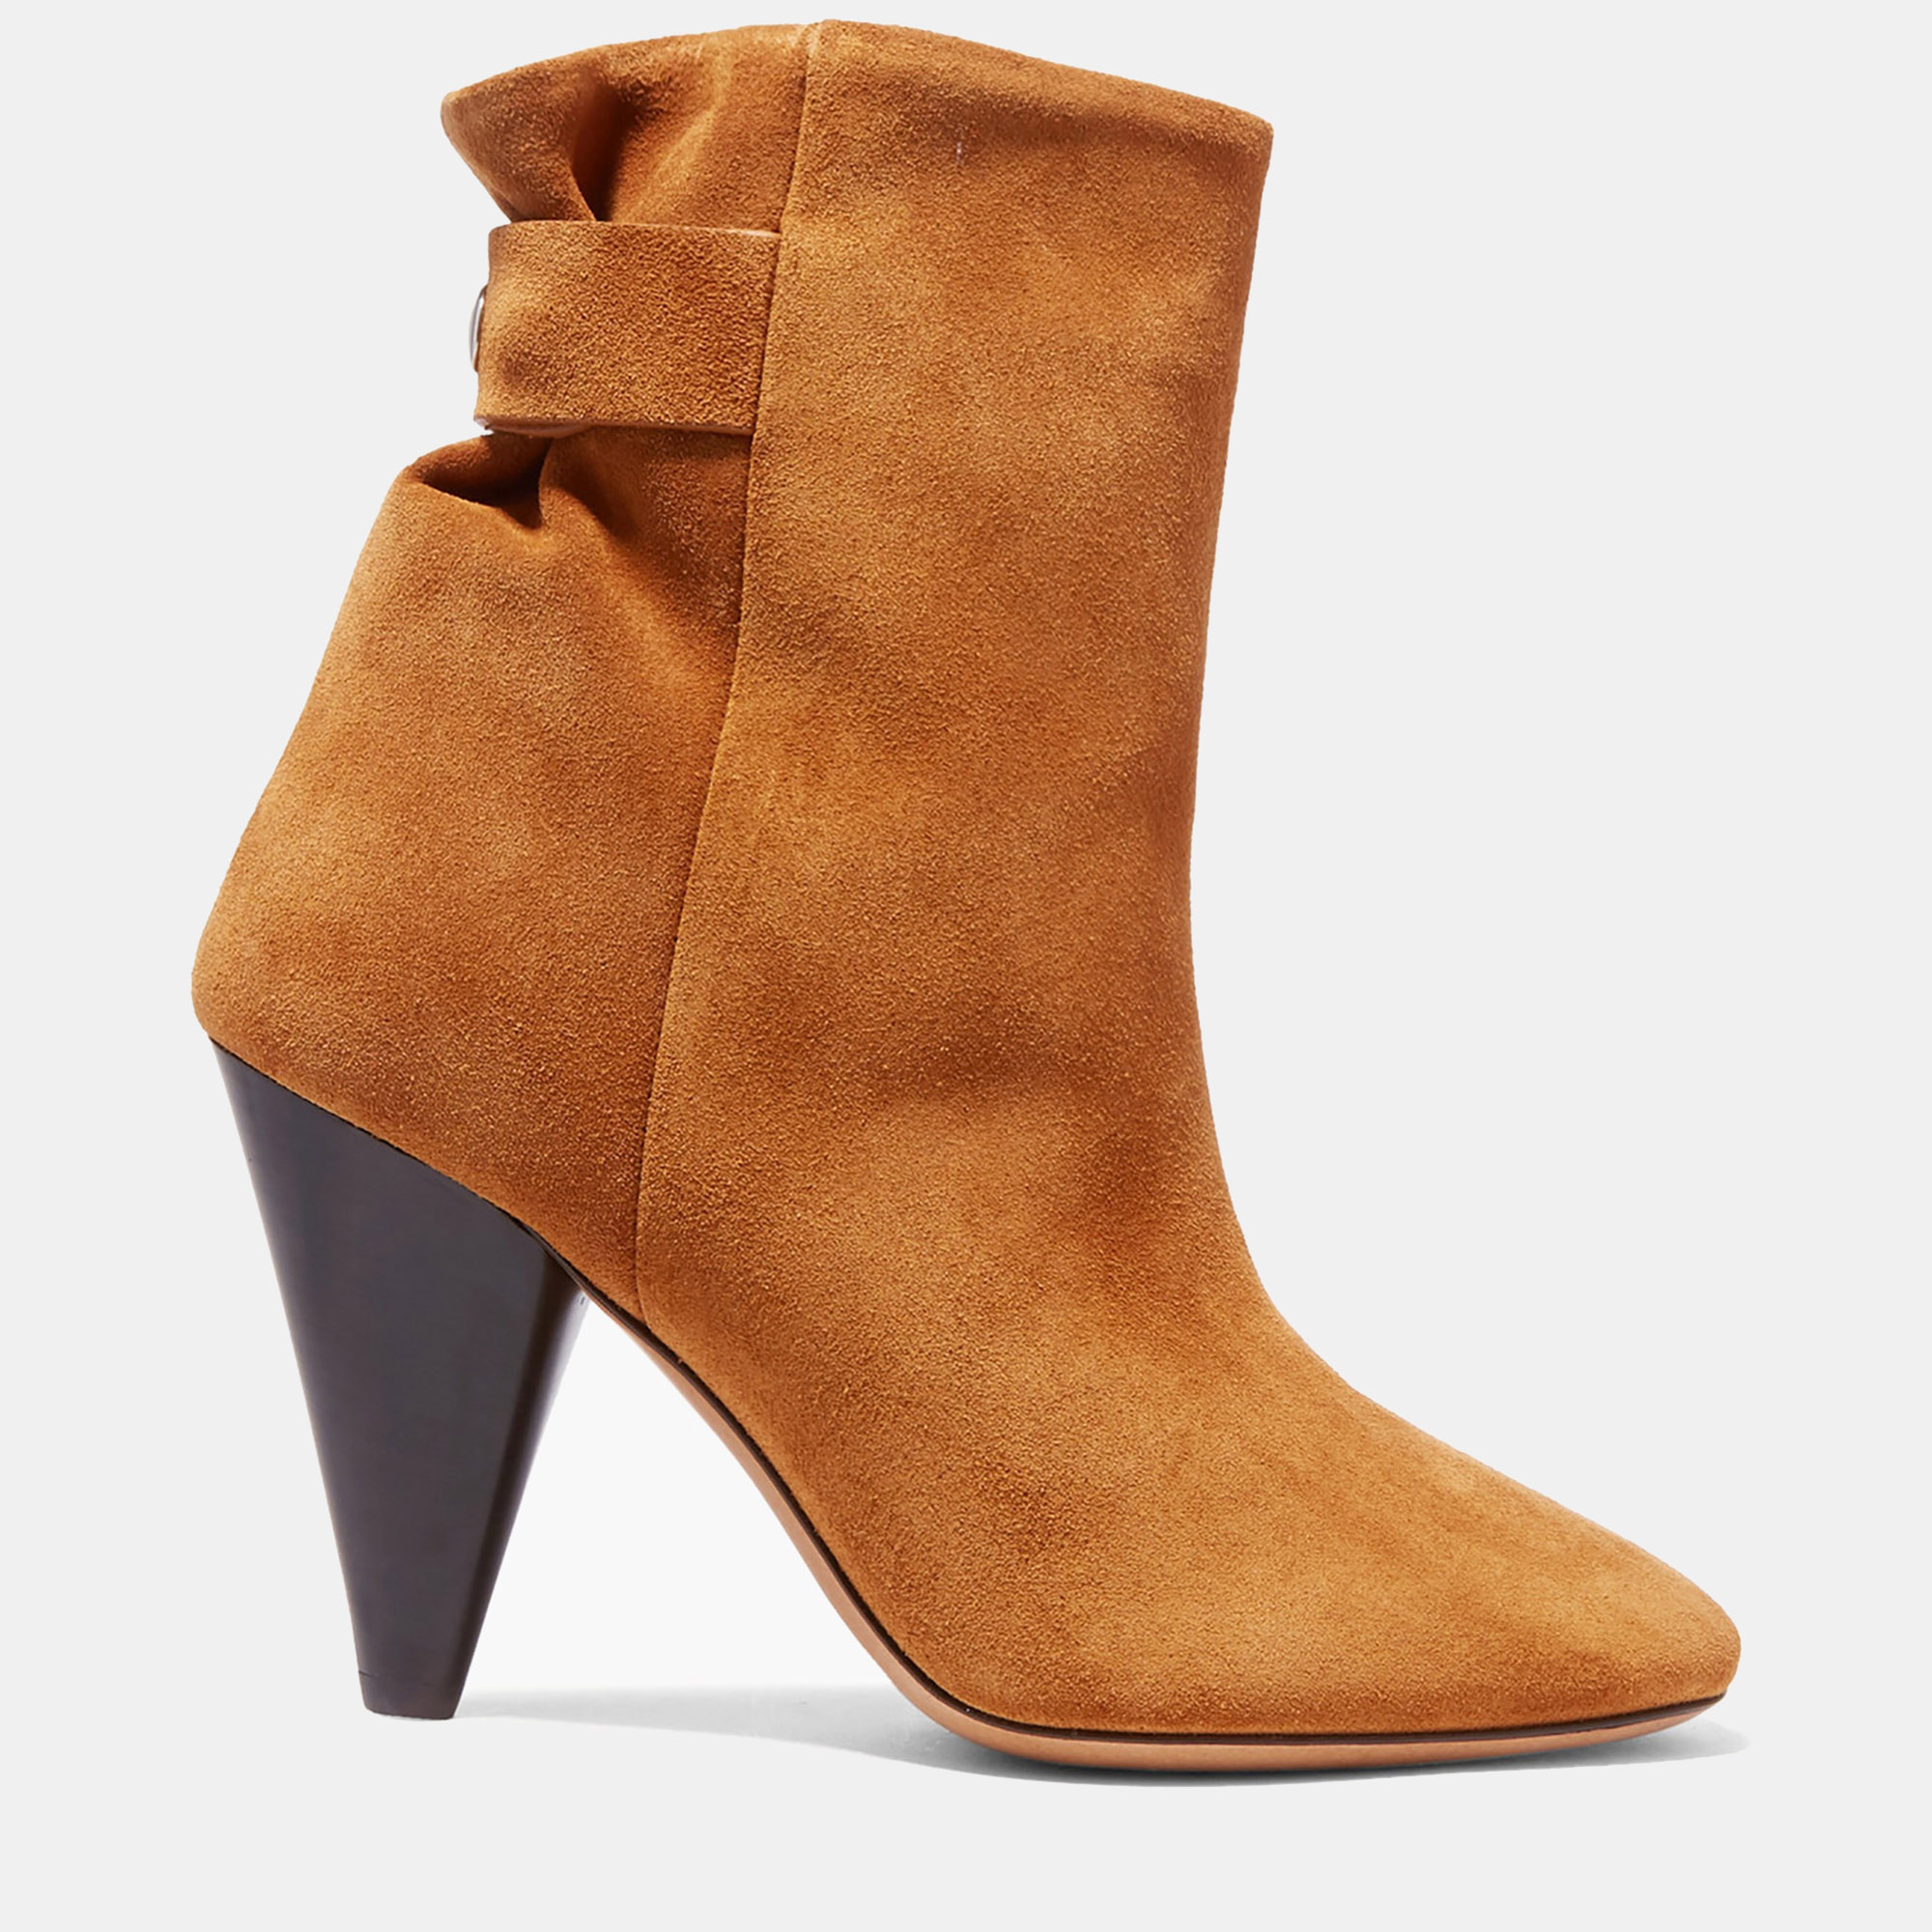 Isabel marant suede ankle boots 37